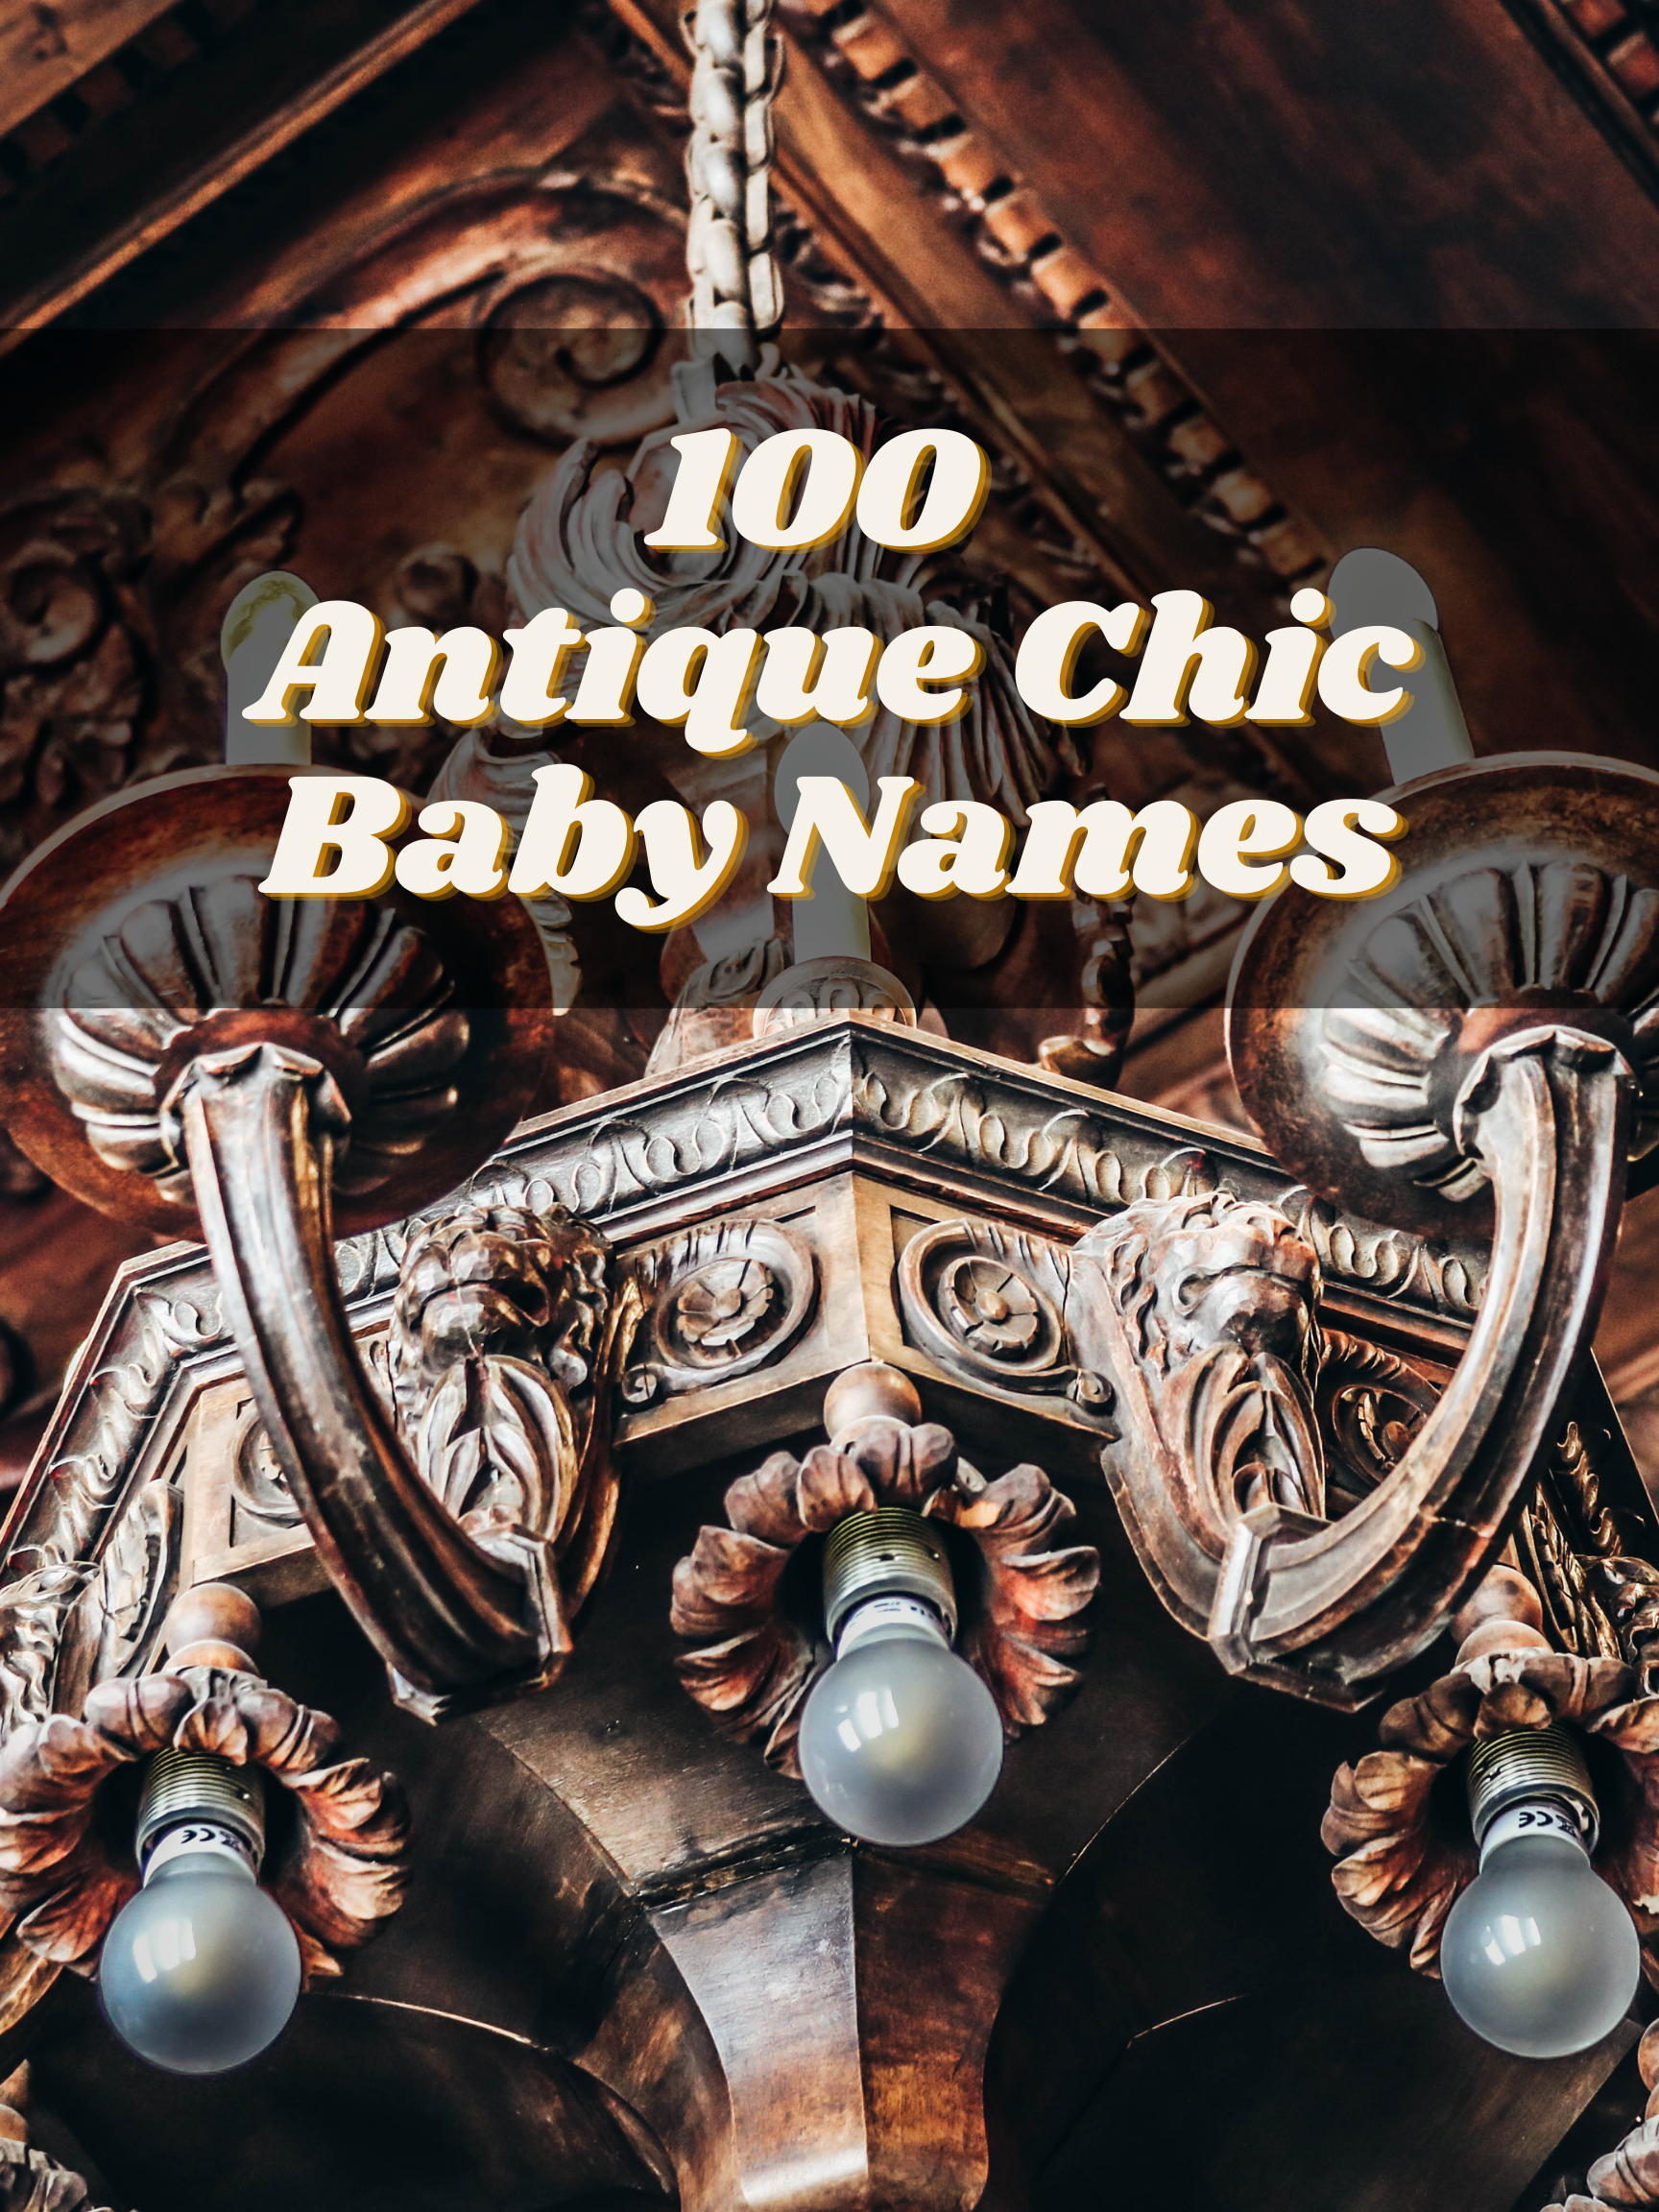 100 Antique Chic Baby Names